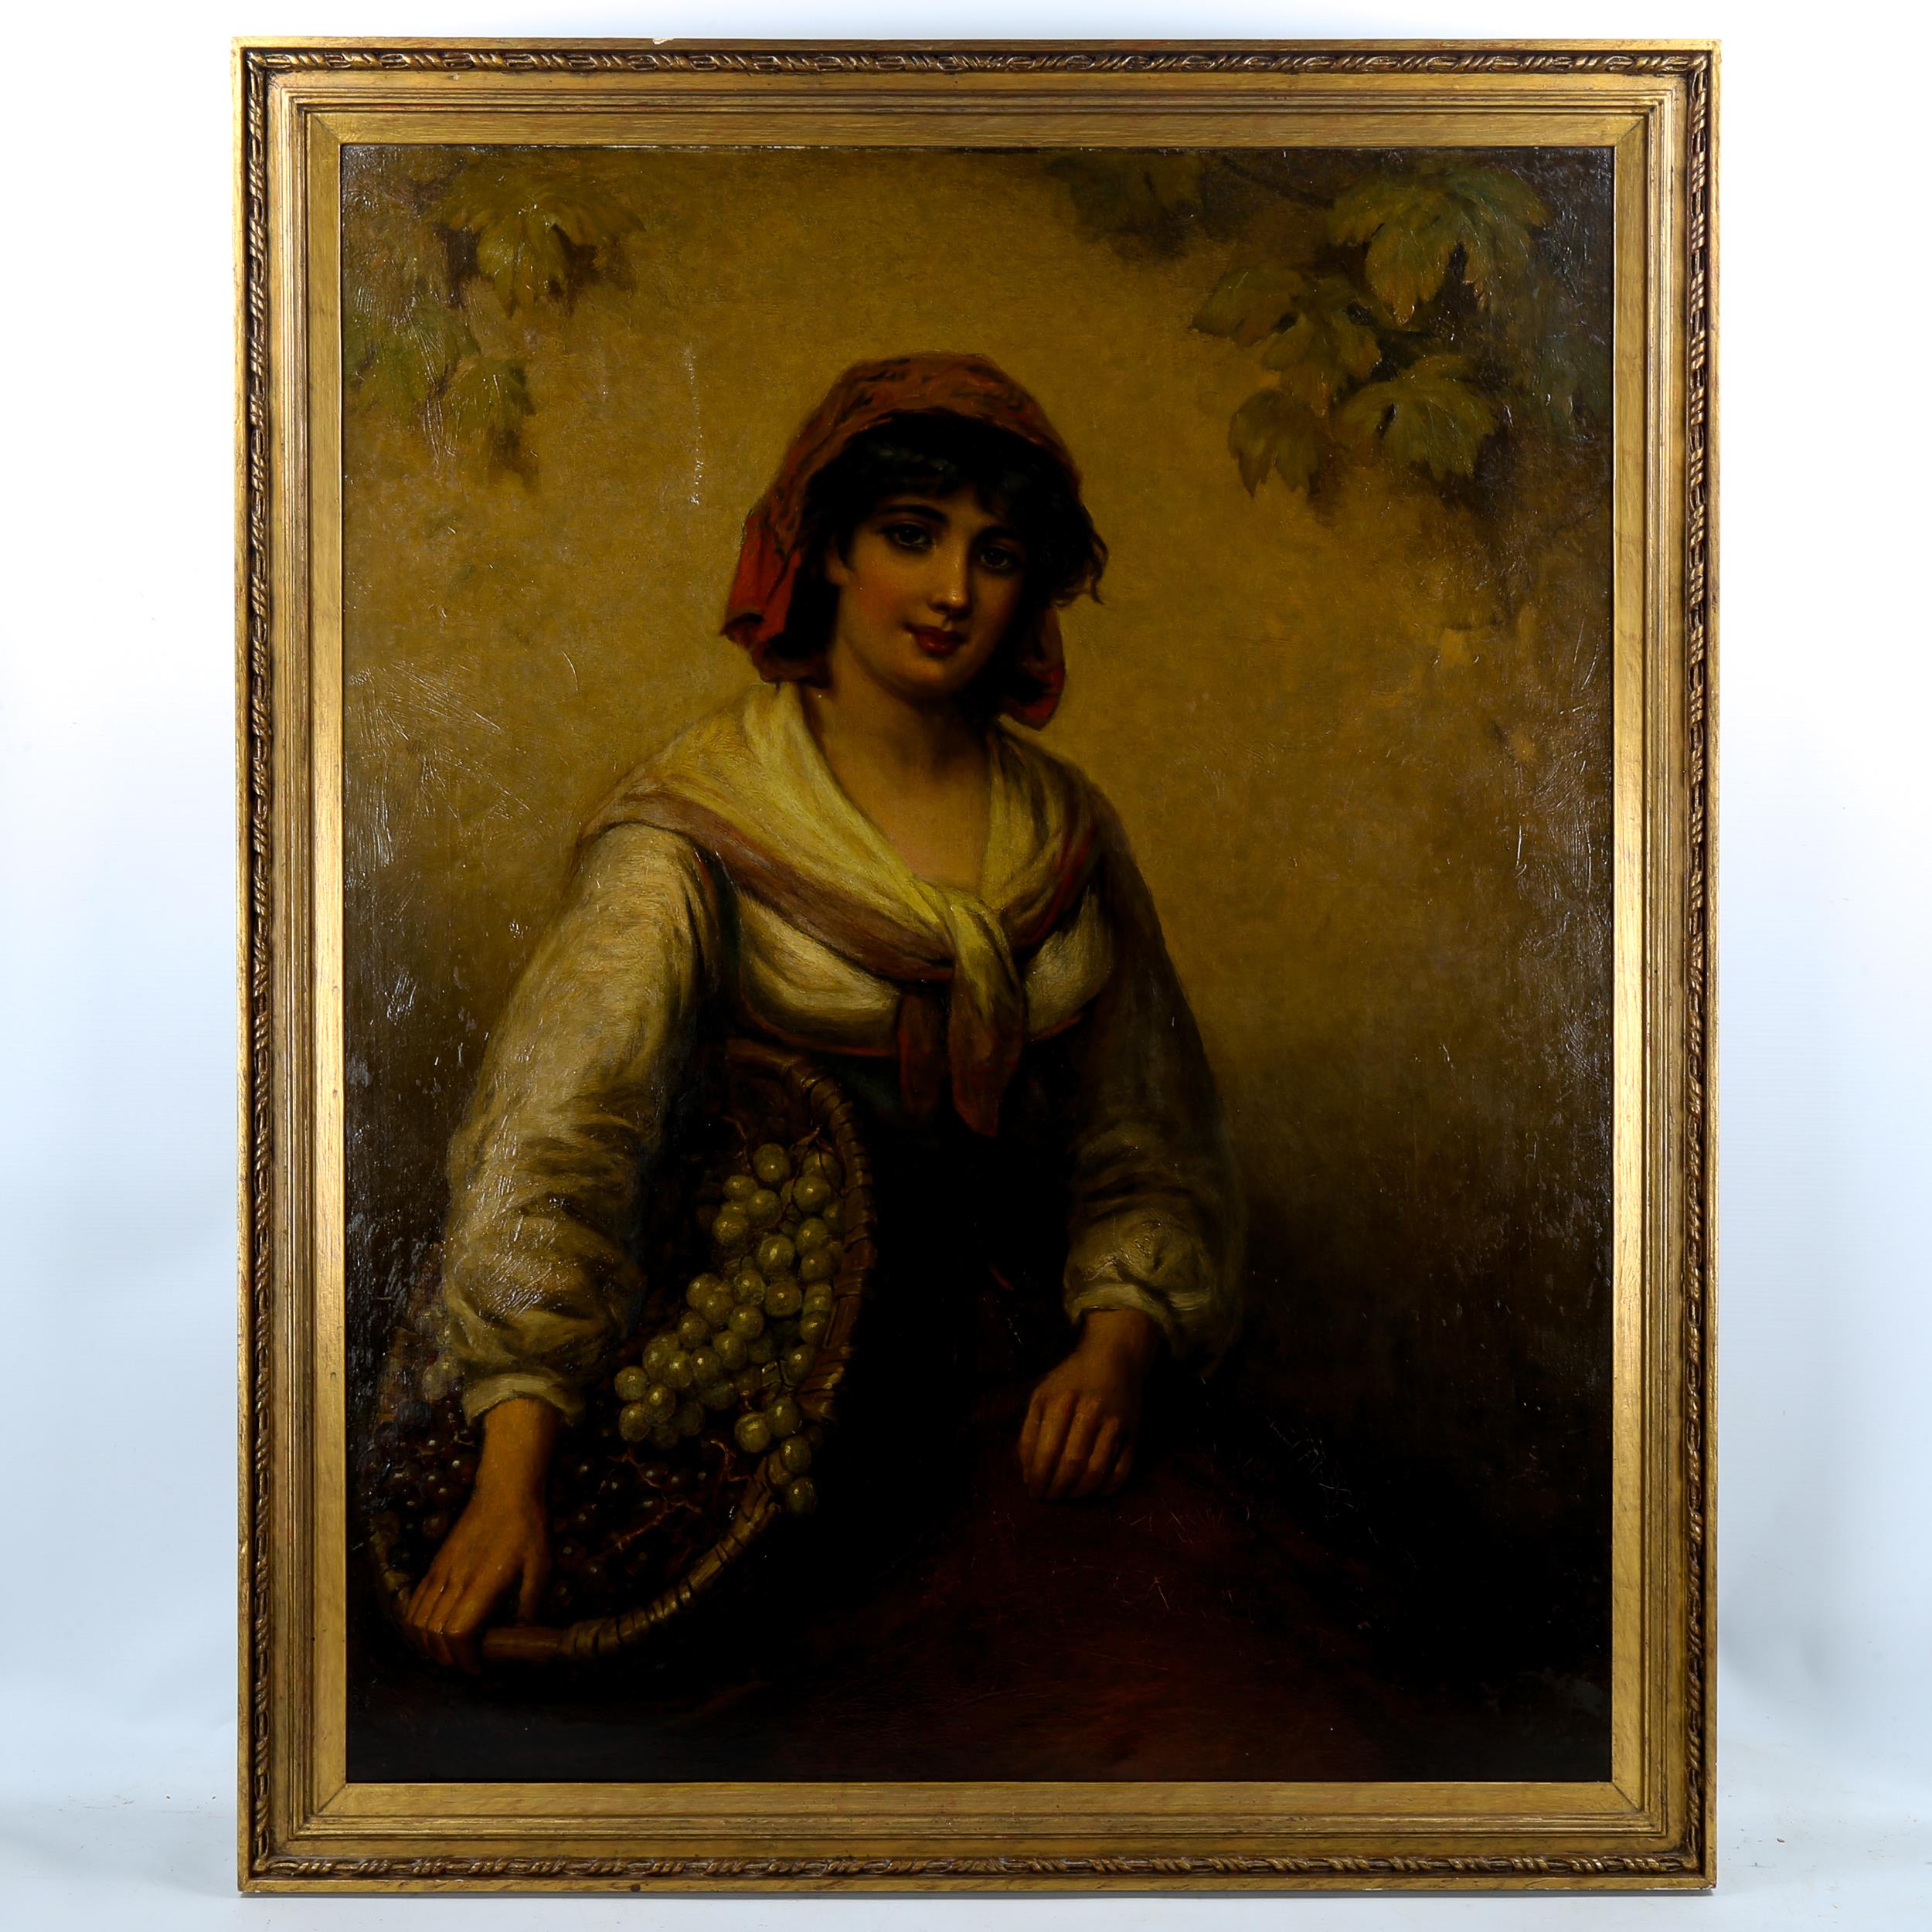 19th century Italian School, oil on canvas, girl with a basket of grapes, unsigned, 92cm 71cm,